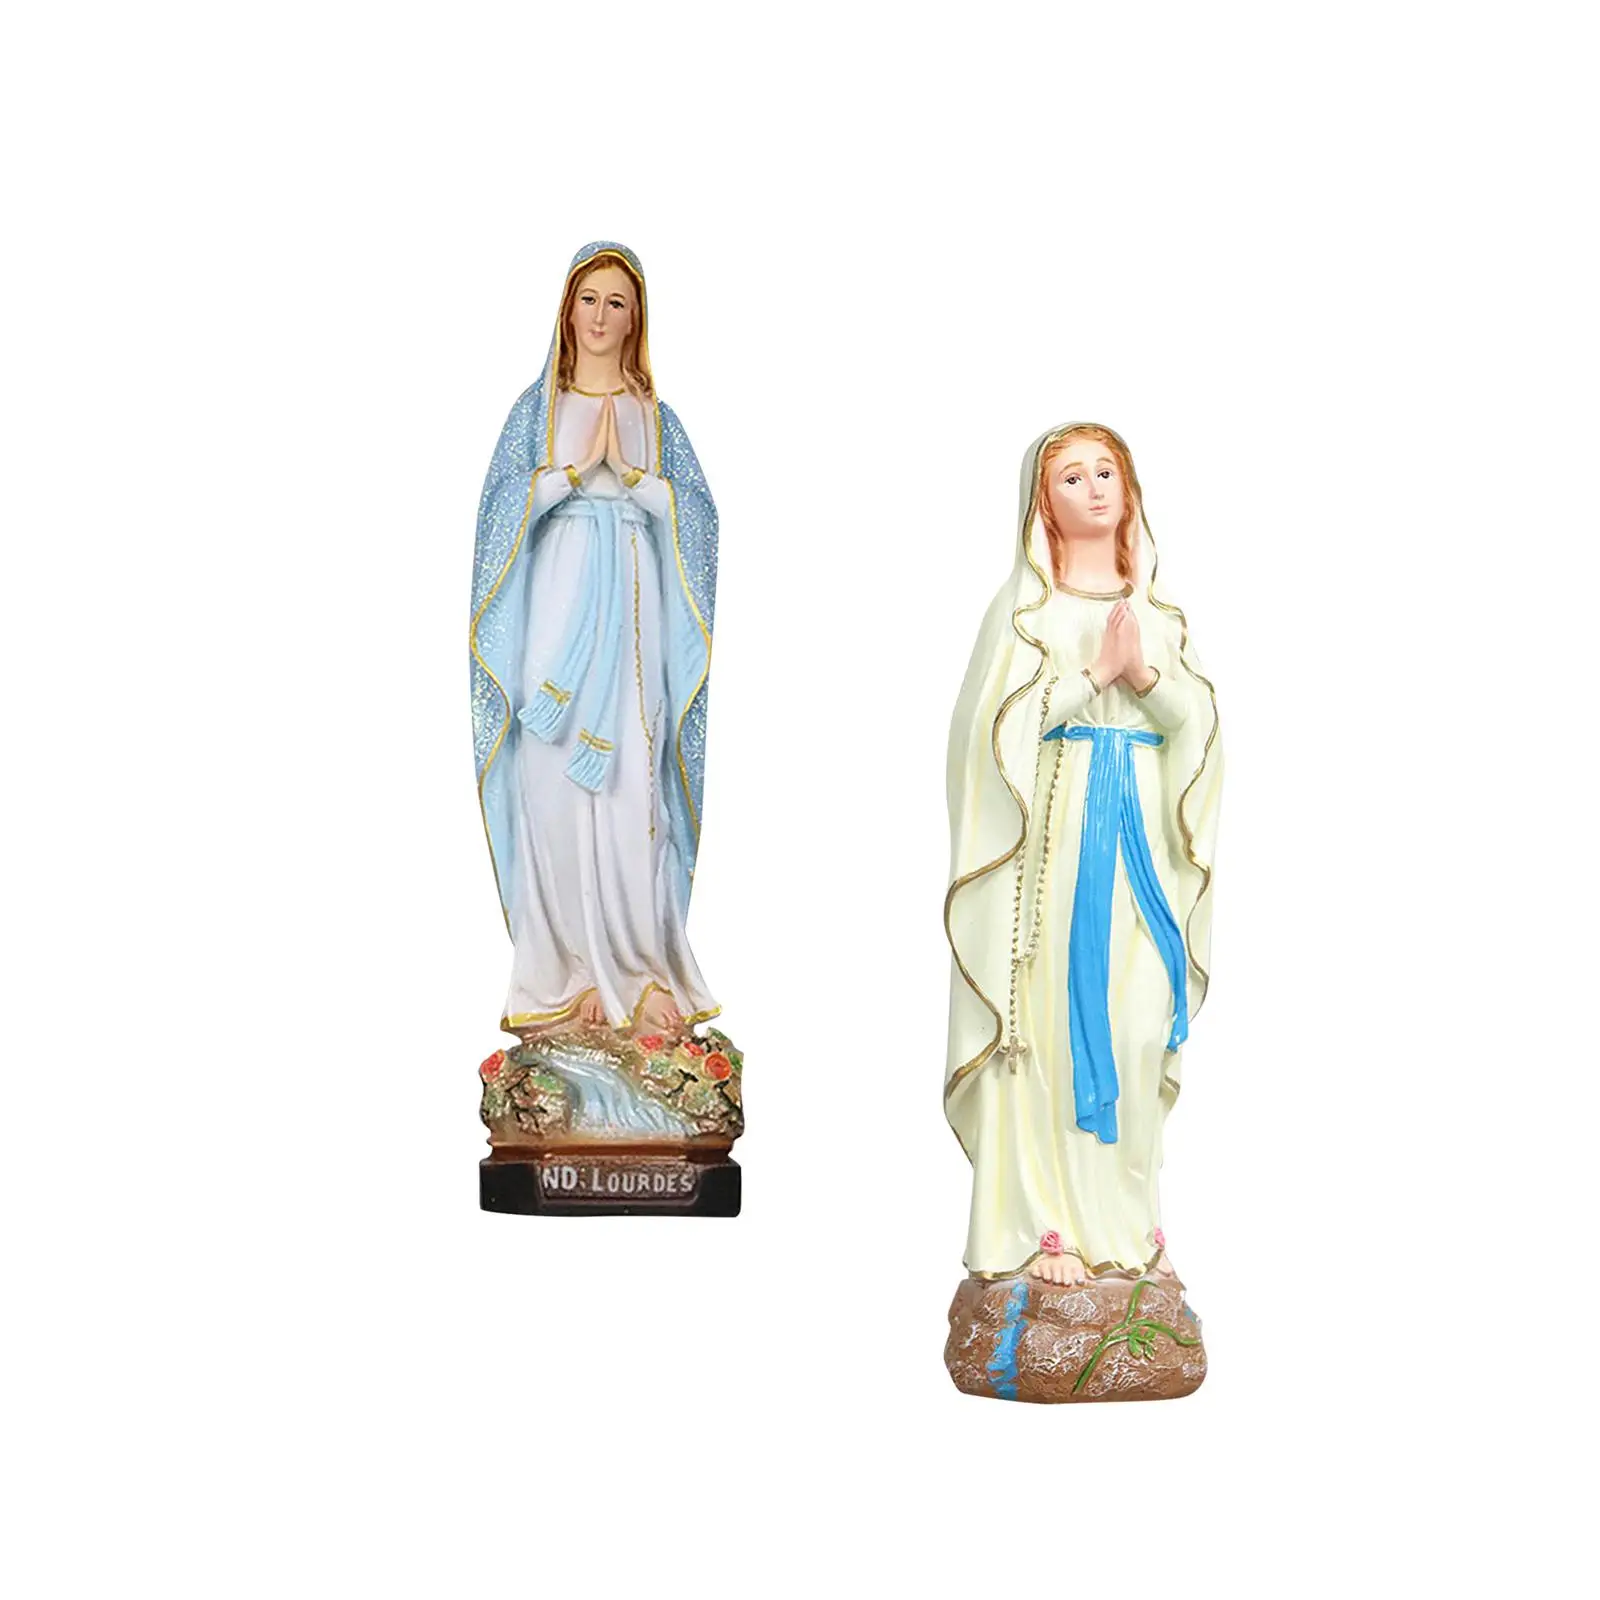 Mother Mary Figurine on Base Statues Décor for Desk Tabletop Living Room